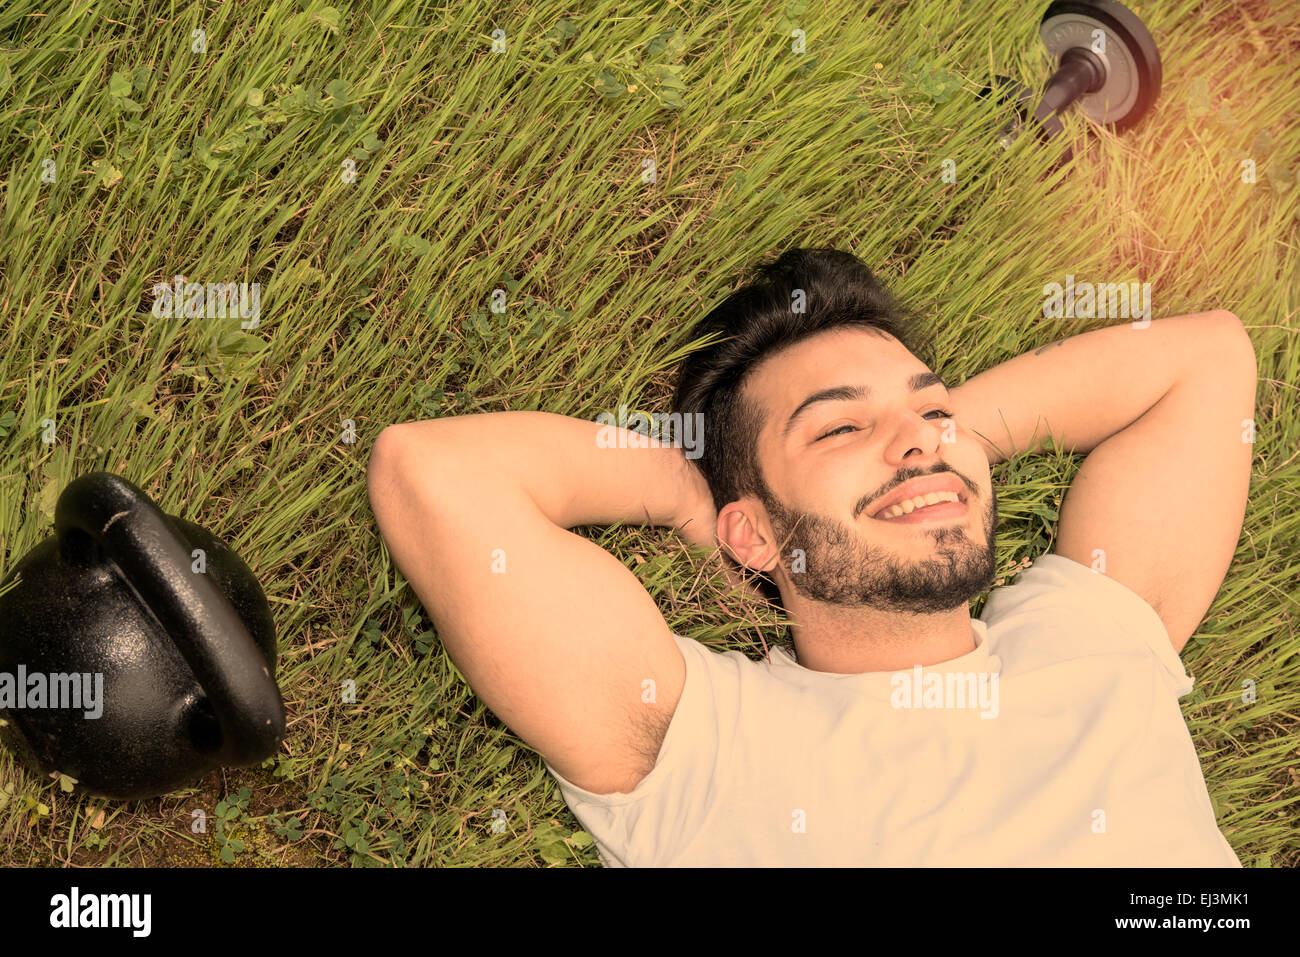 portrait of young athletic male model laughing after sport time warm filter and a lens flare applied Stock Photo